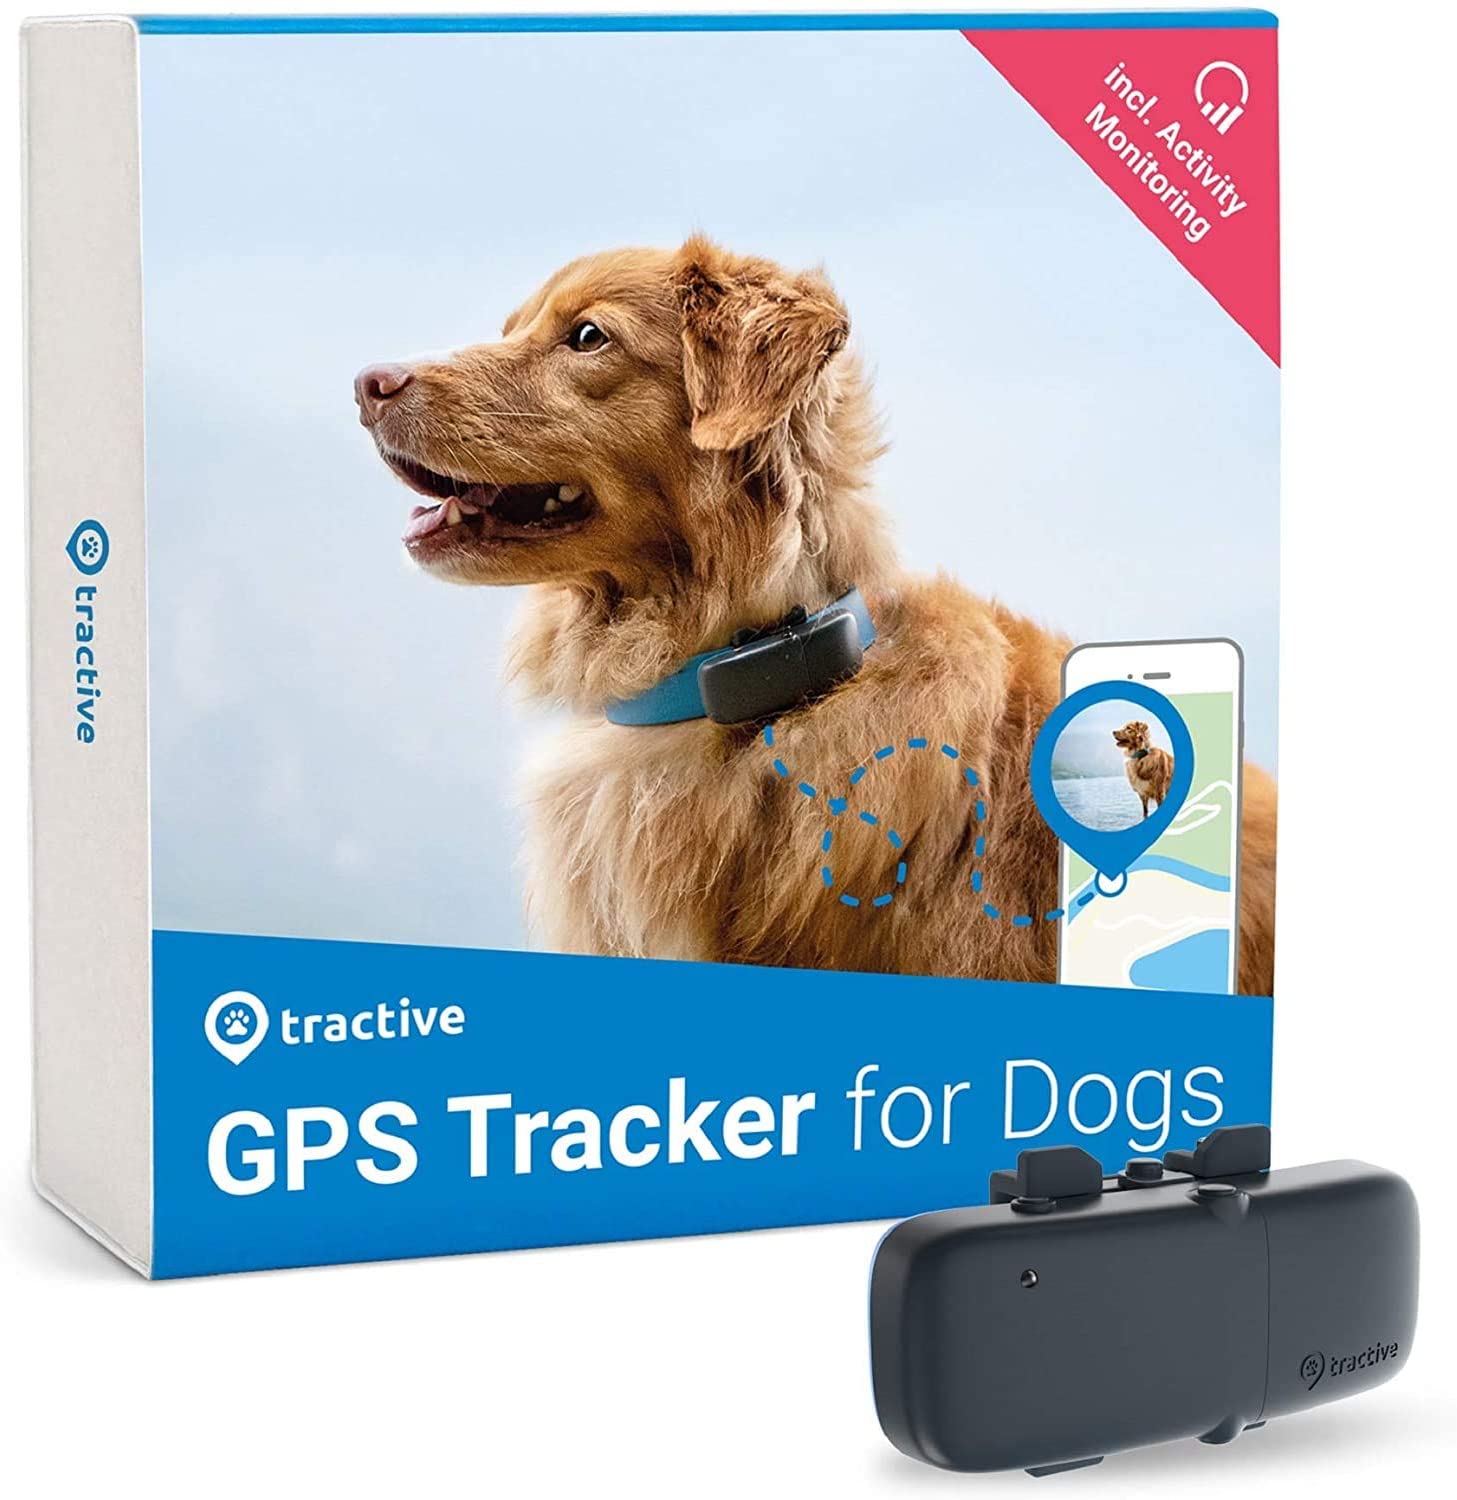 Tractive GPS Tracker for Dogs, unlimited Range, Activity Monitor, Waterproof (newest model)